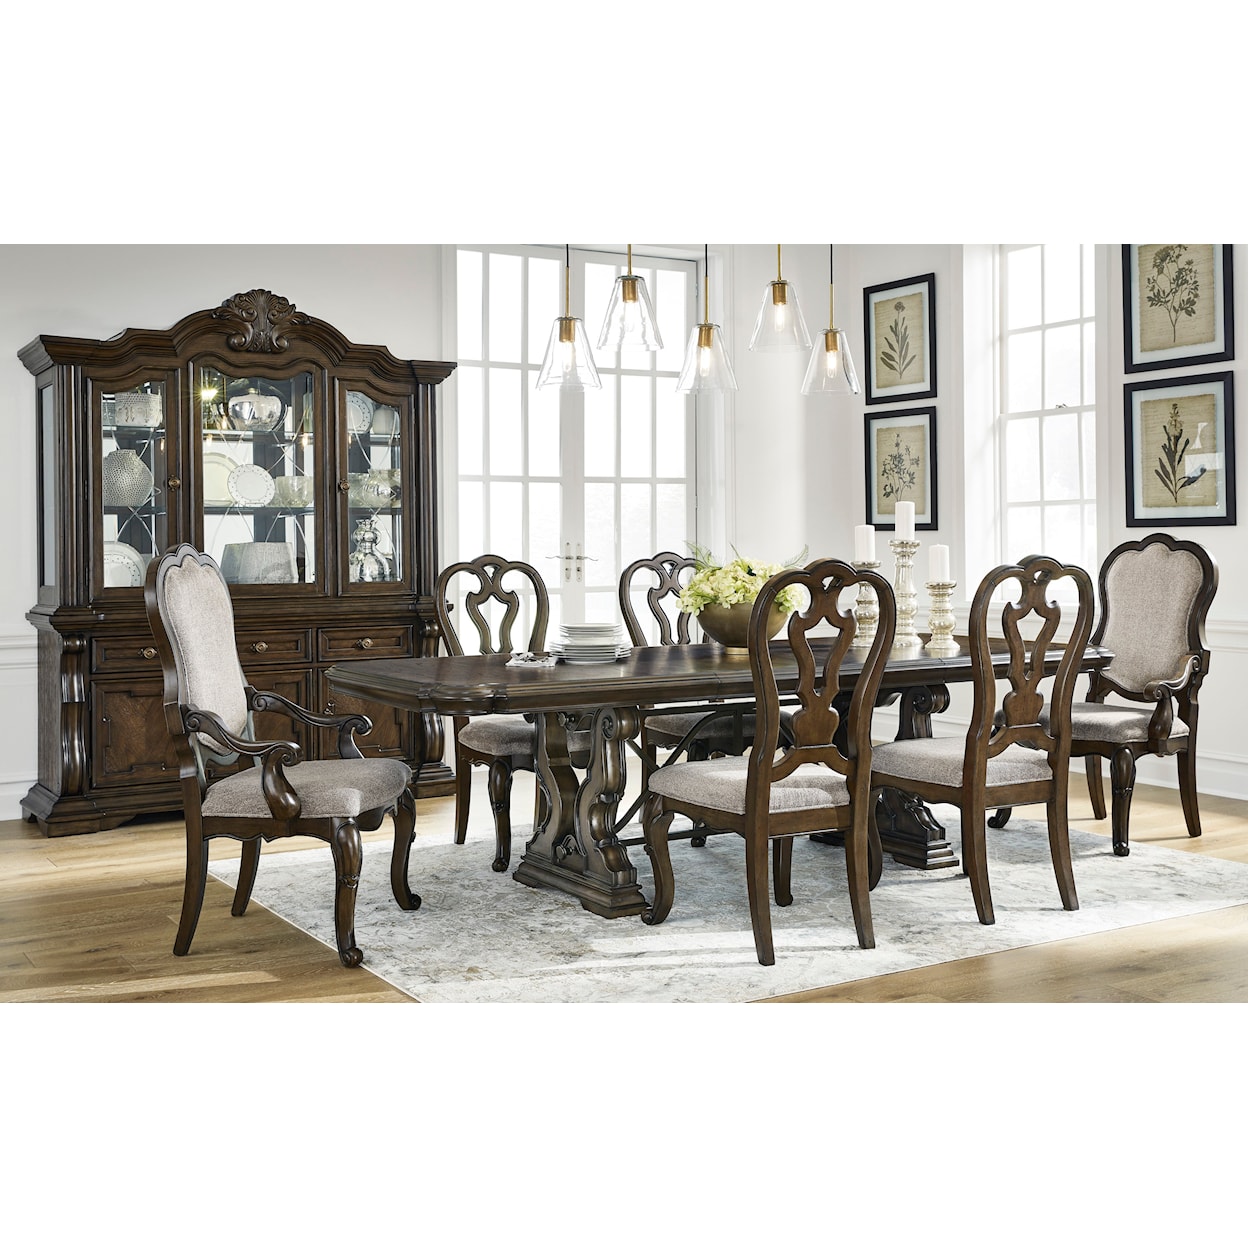 Signature Design by Ashley Furniture Maylee Dining Set